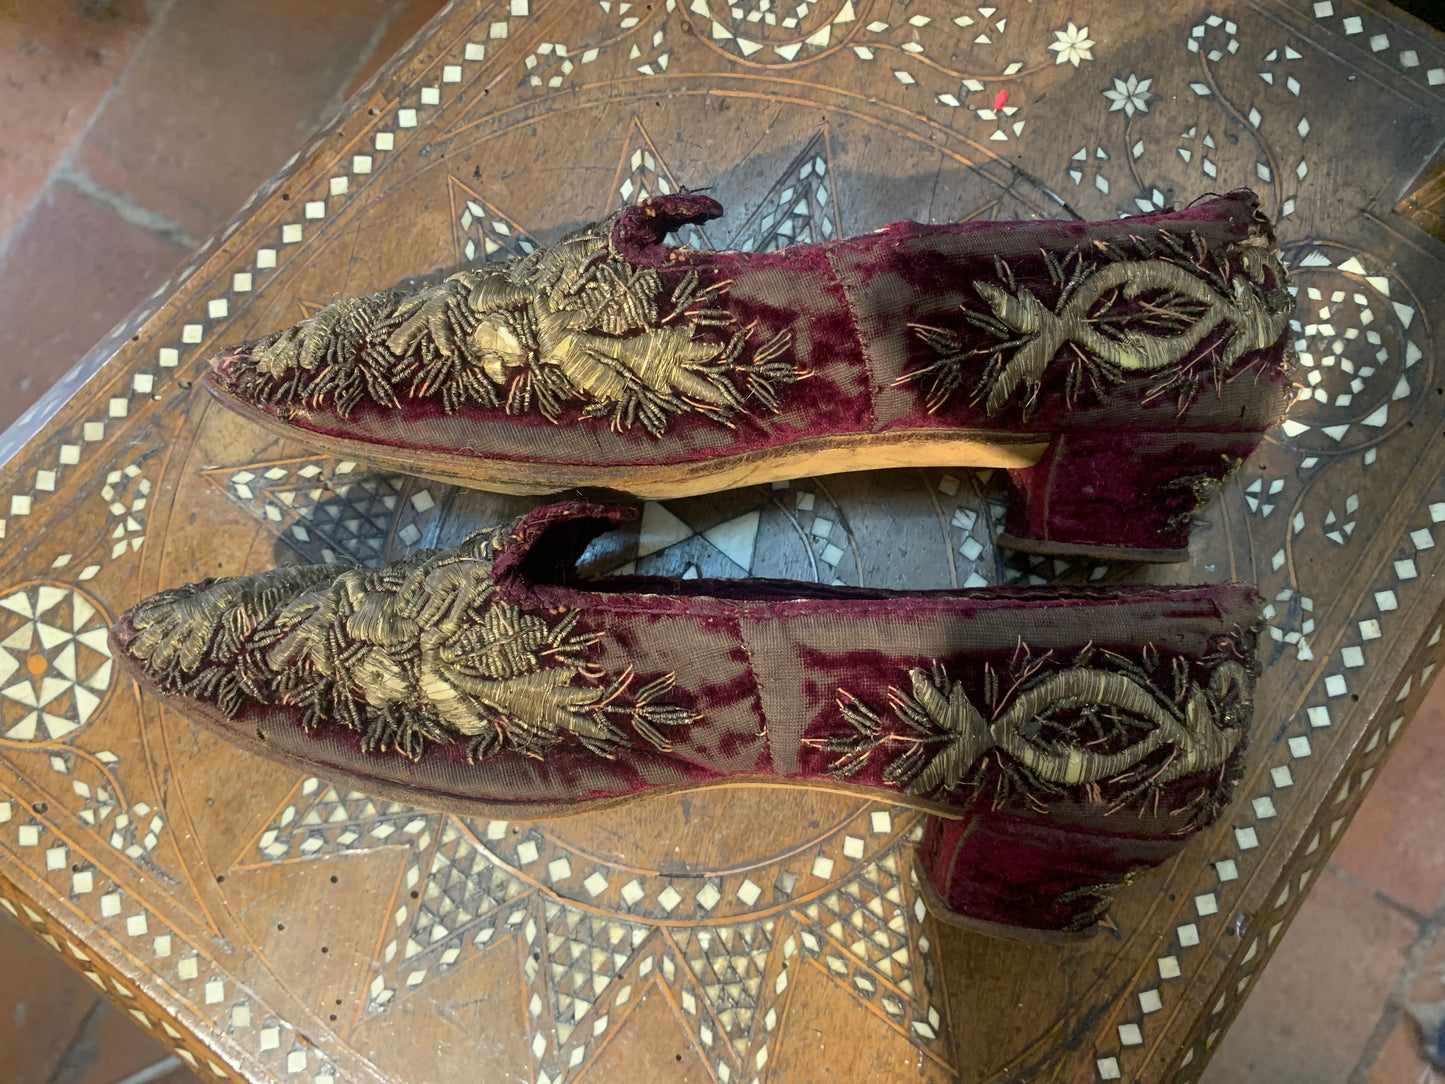 Ottoman empire slippers with gold thread padded embroidery. XIX century.